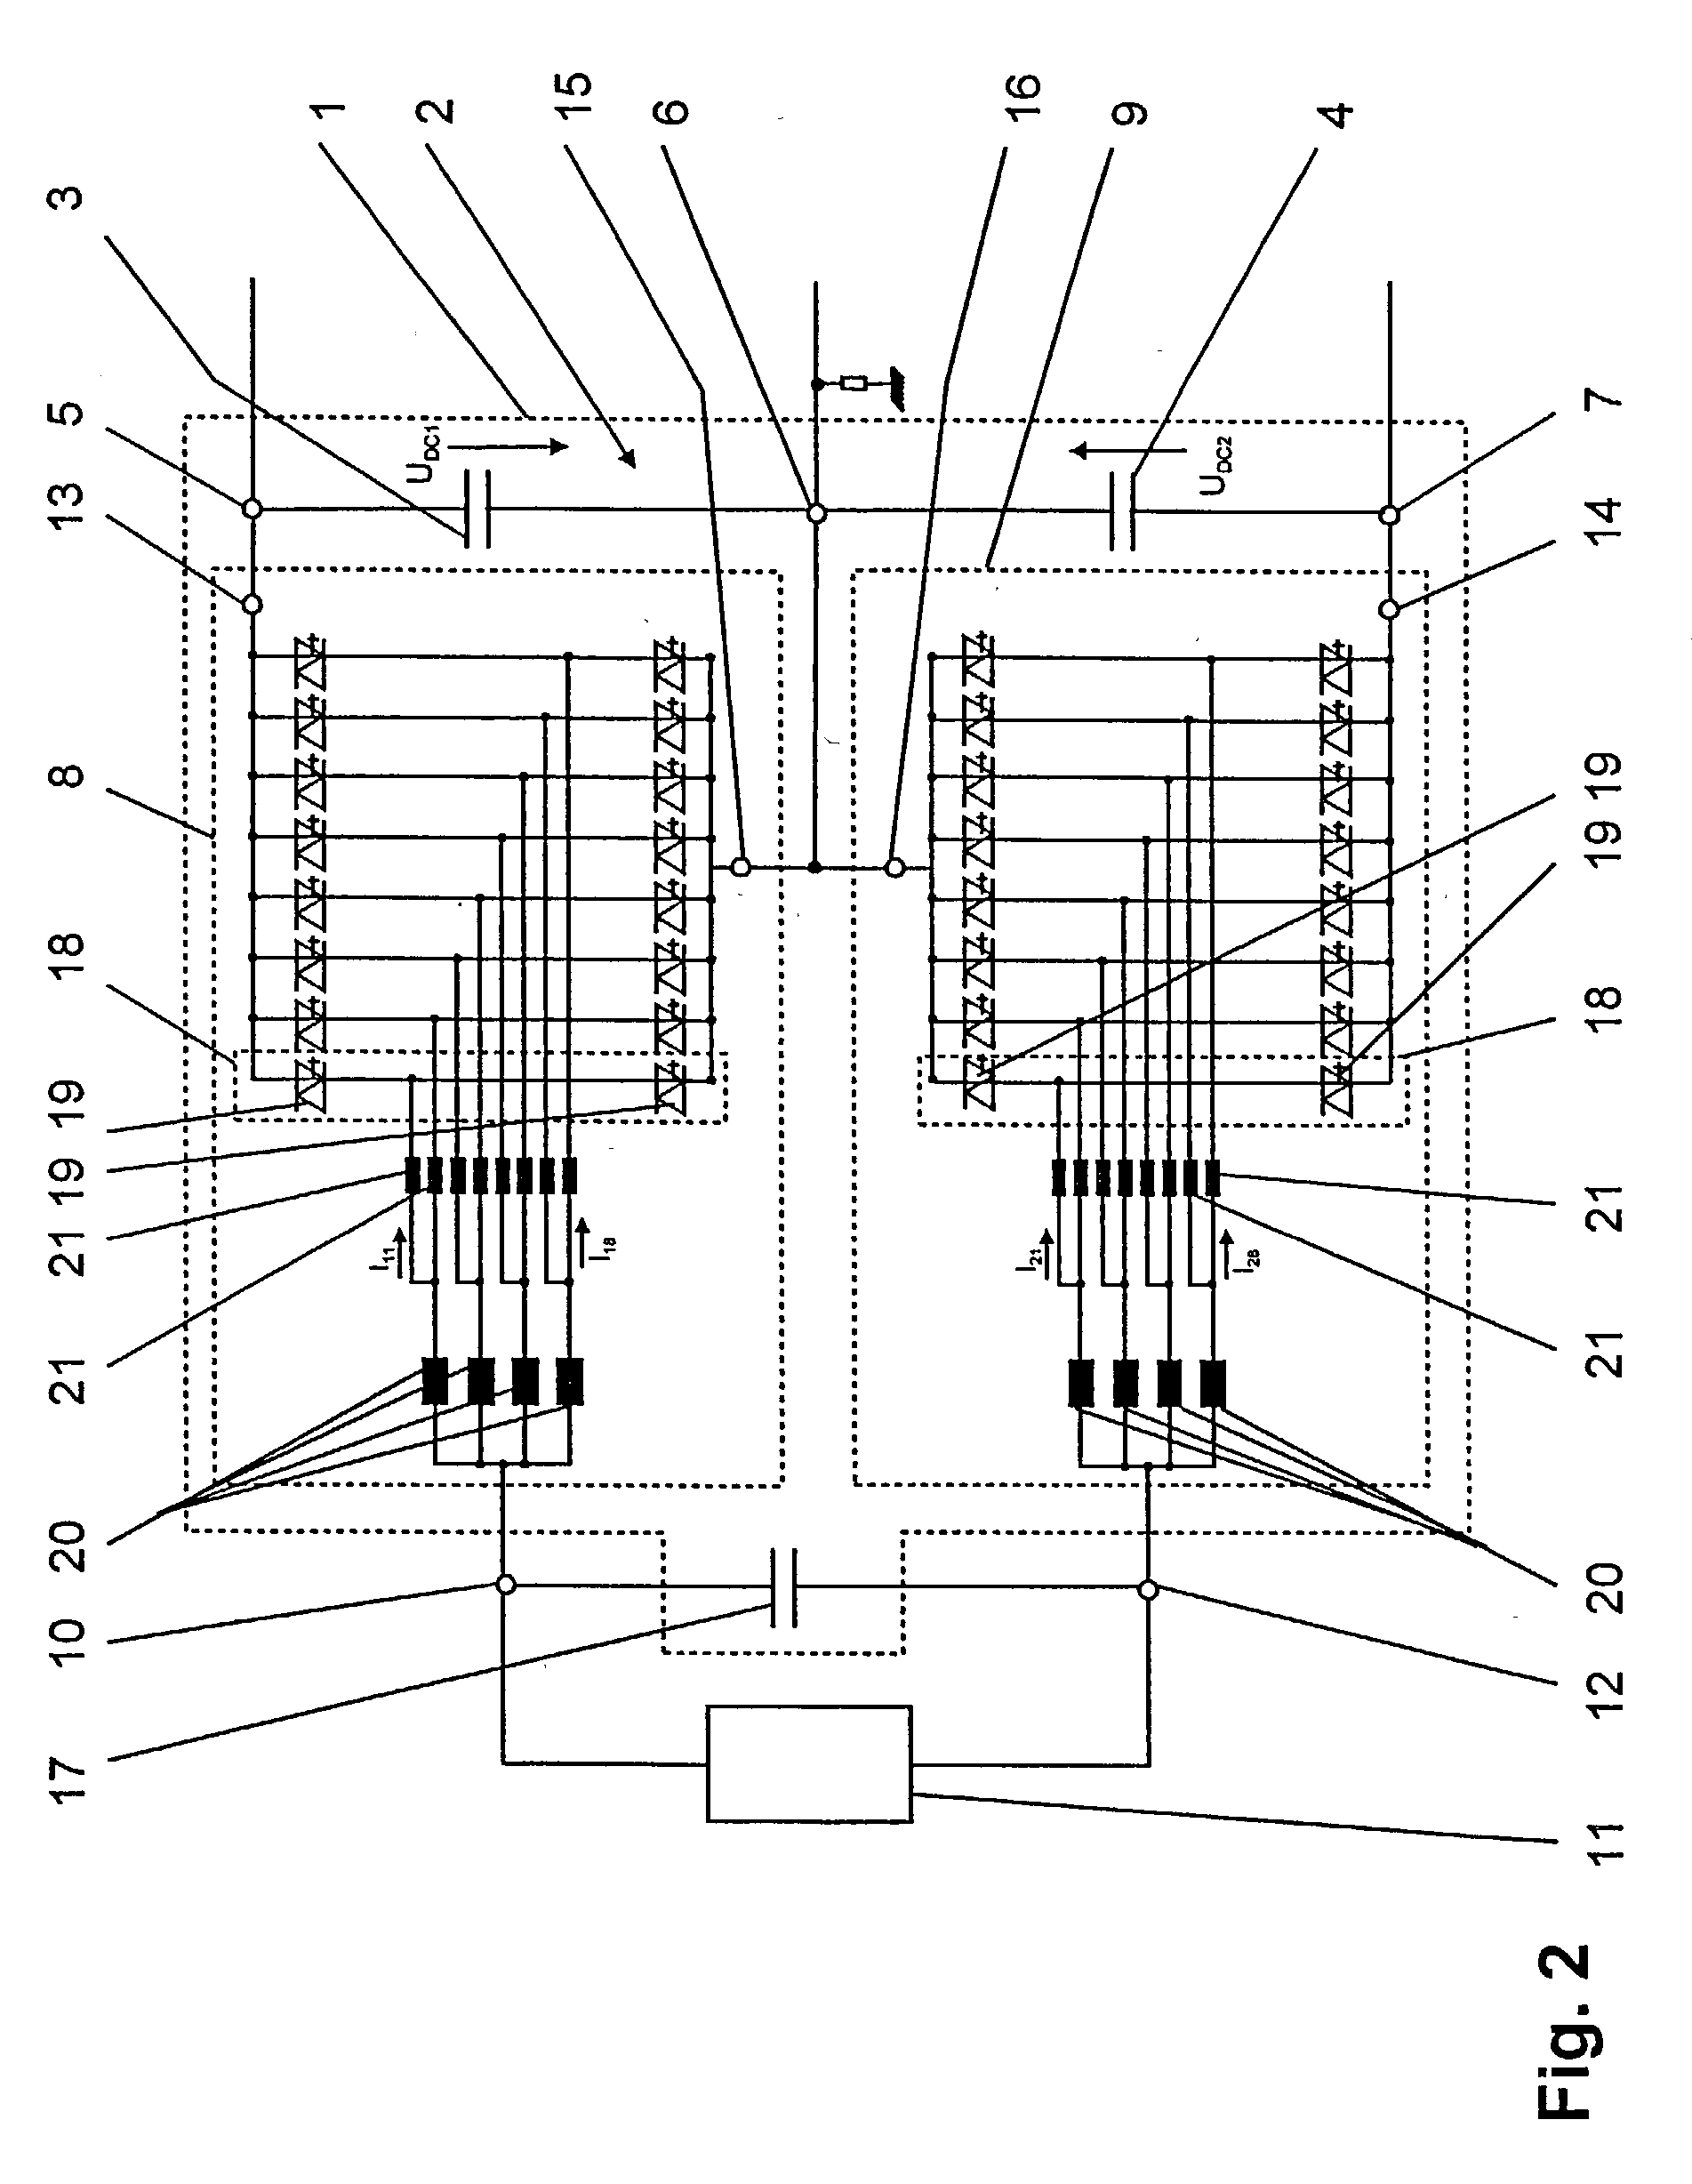 Converter circuit arrangement, as well as a method for matching a variable DC voltage